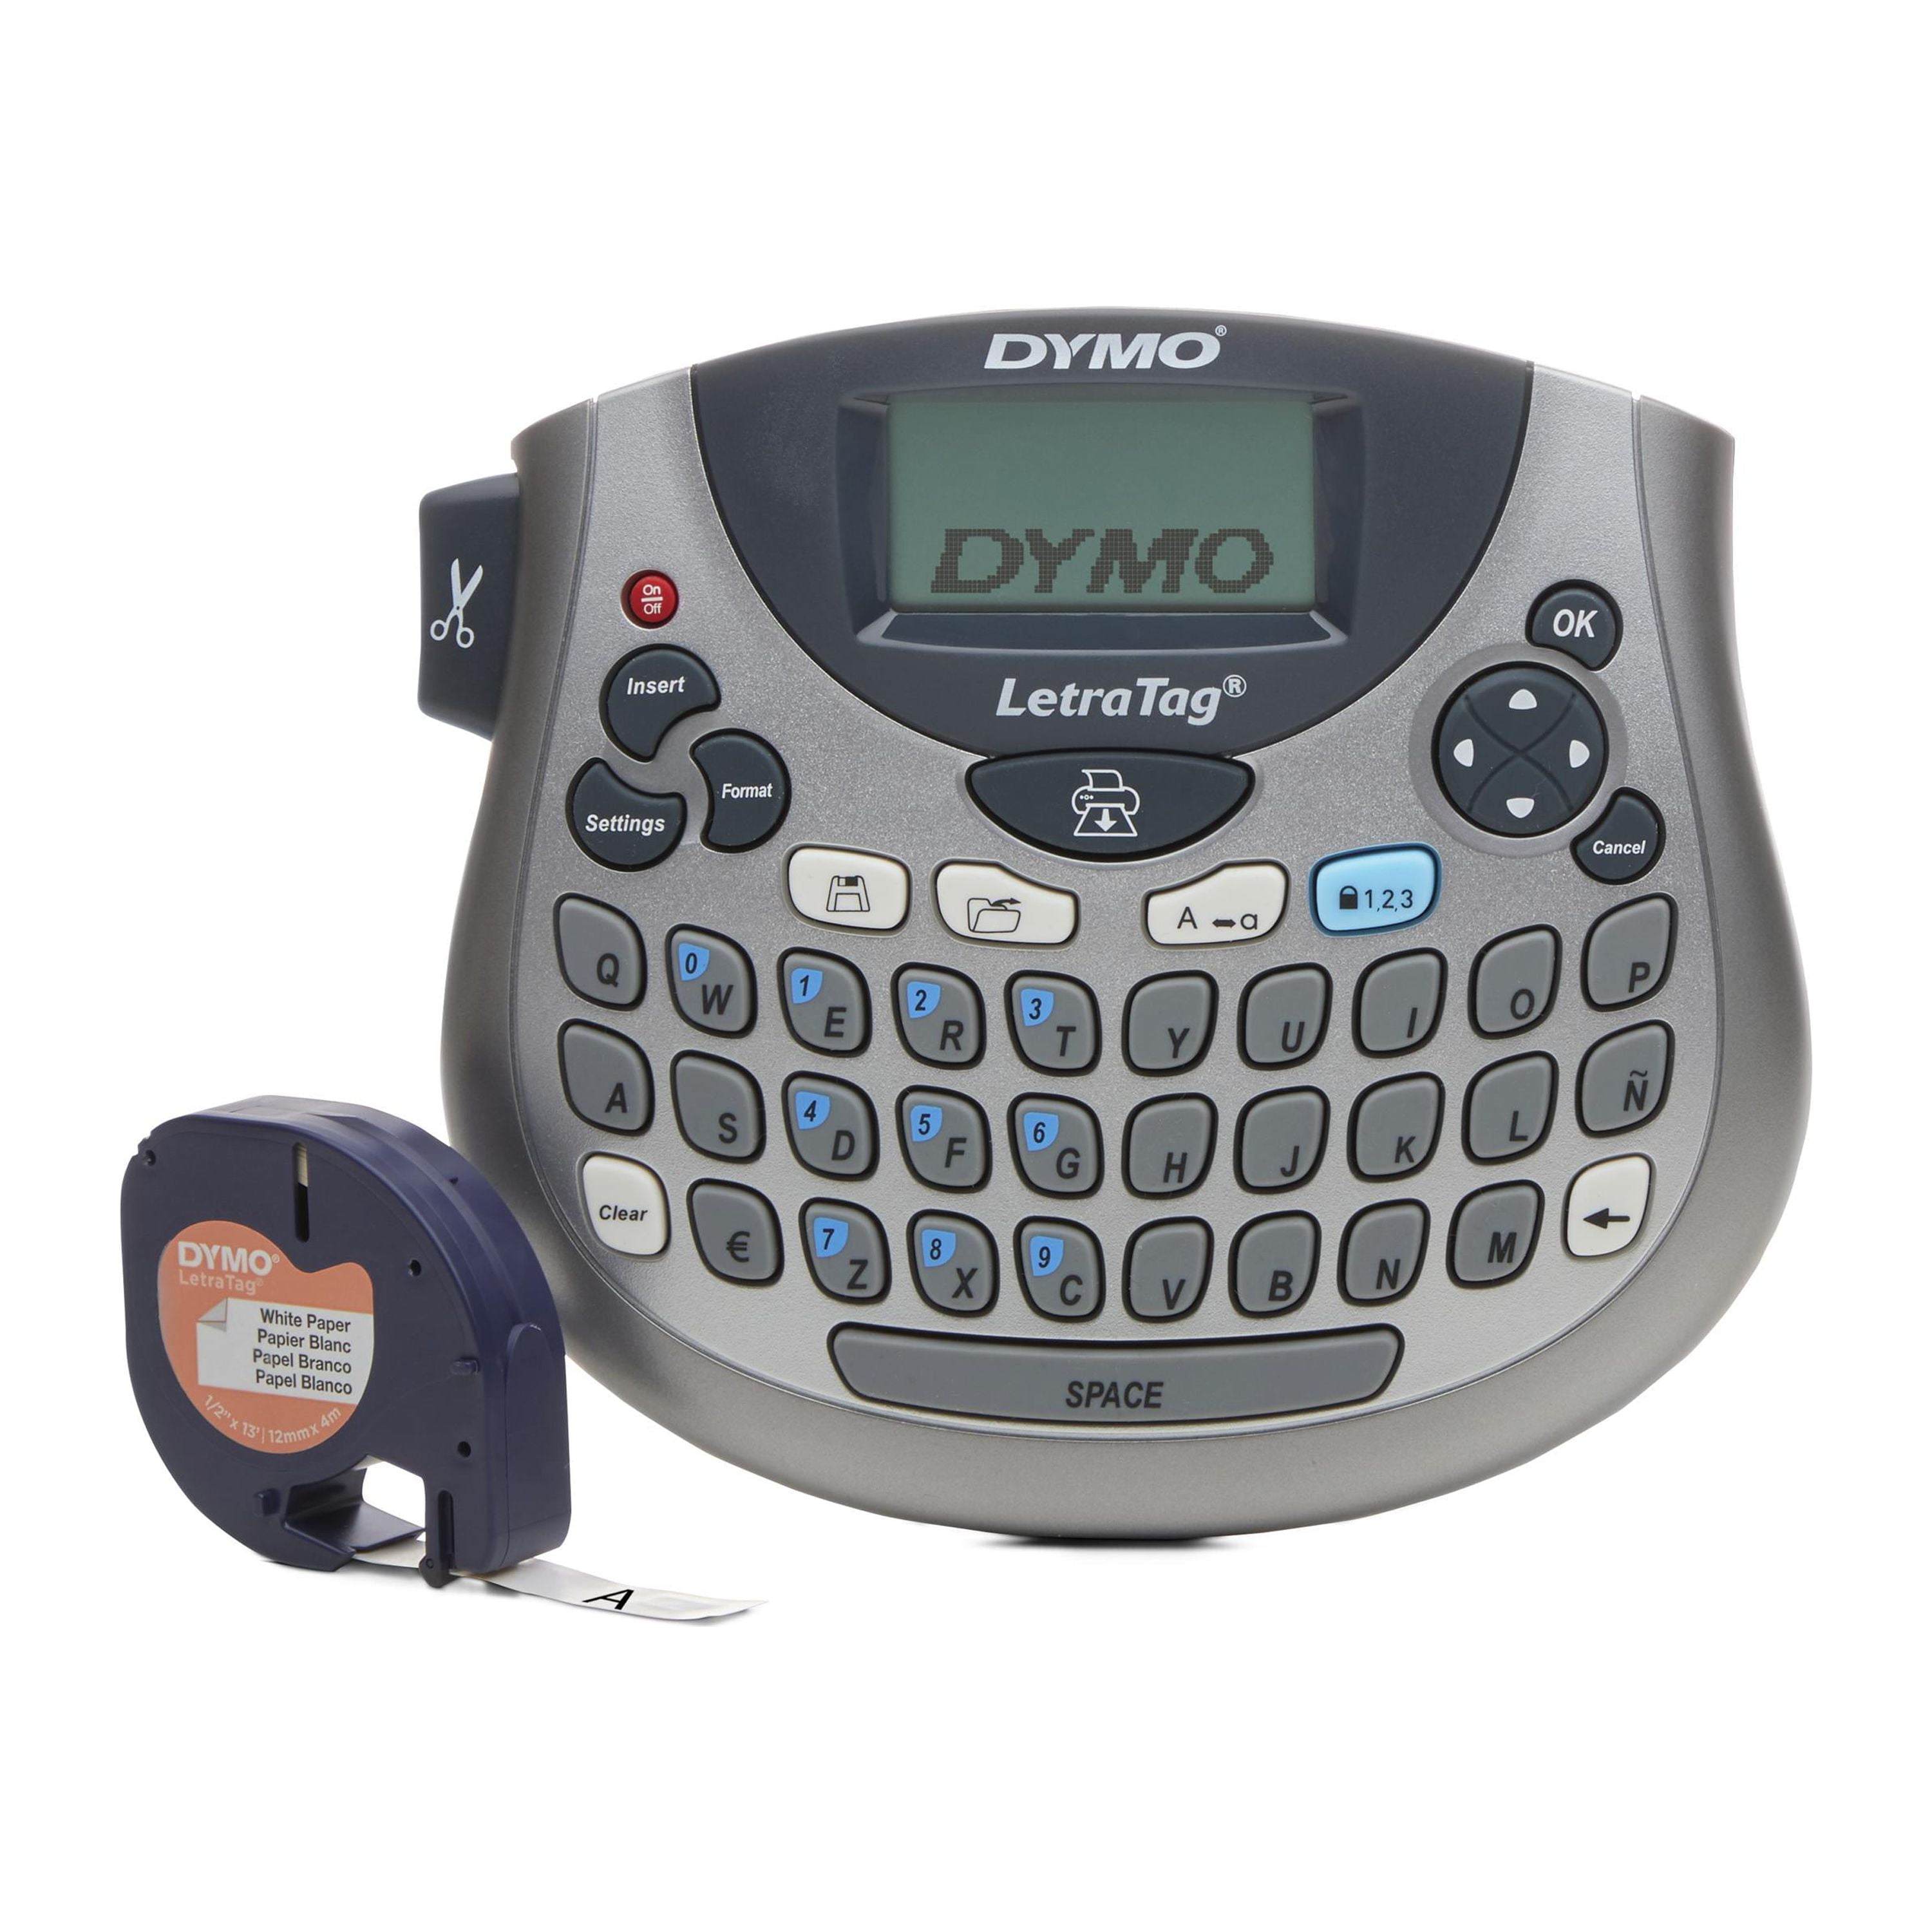 Dymo LetraTag 100T Plus, Silver Qwerty Label Maker with Black Print on White Label Tape (1/2 x 13 Feet) 2164248